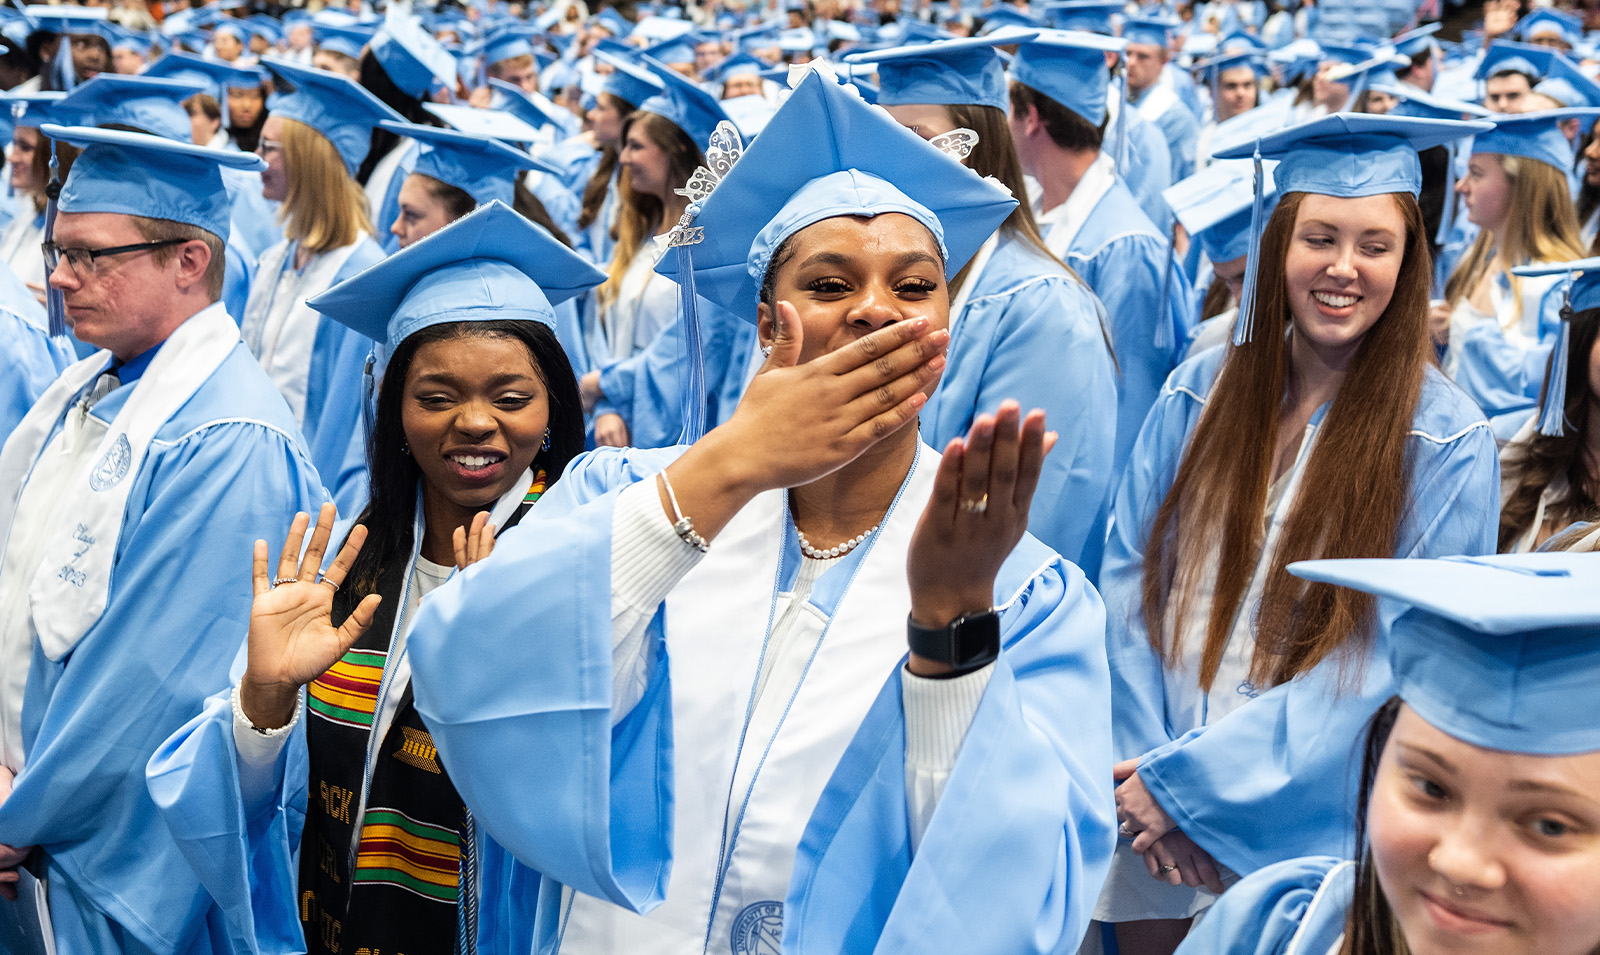 A graduate blowing a kiss with her hand at Winter Commencemnt.